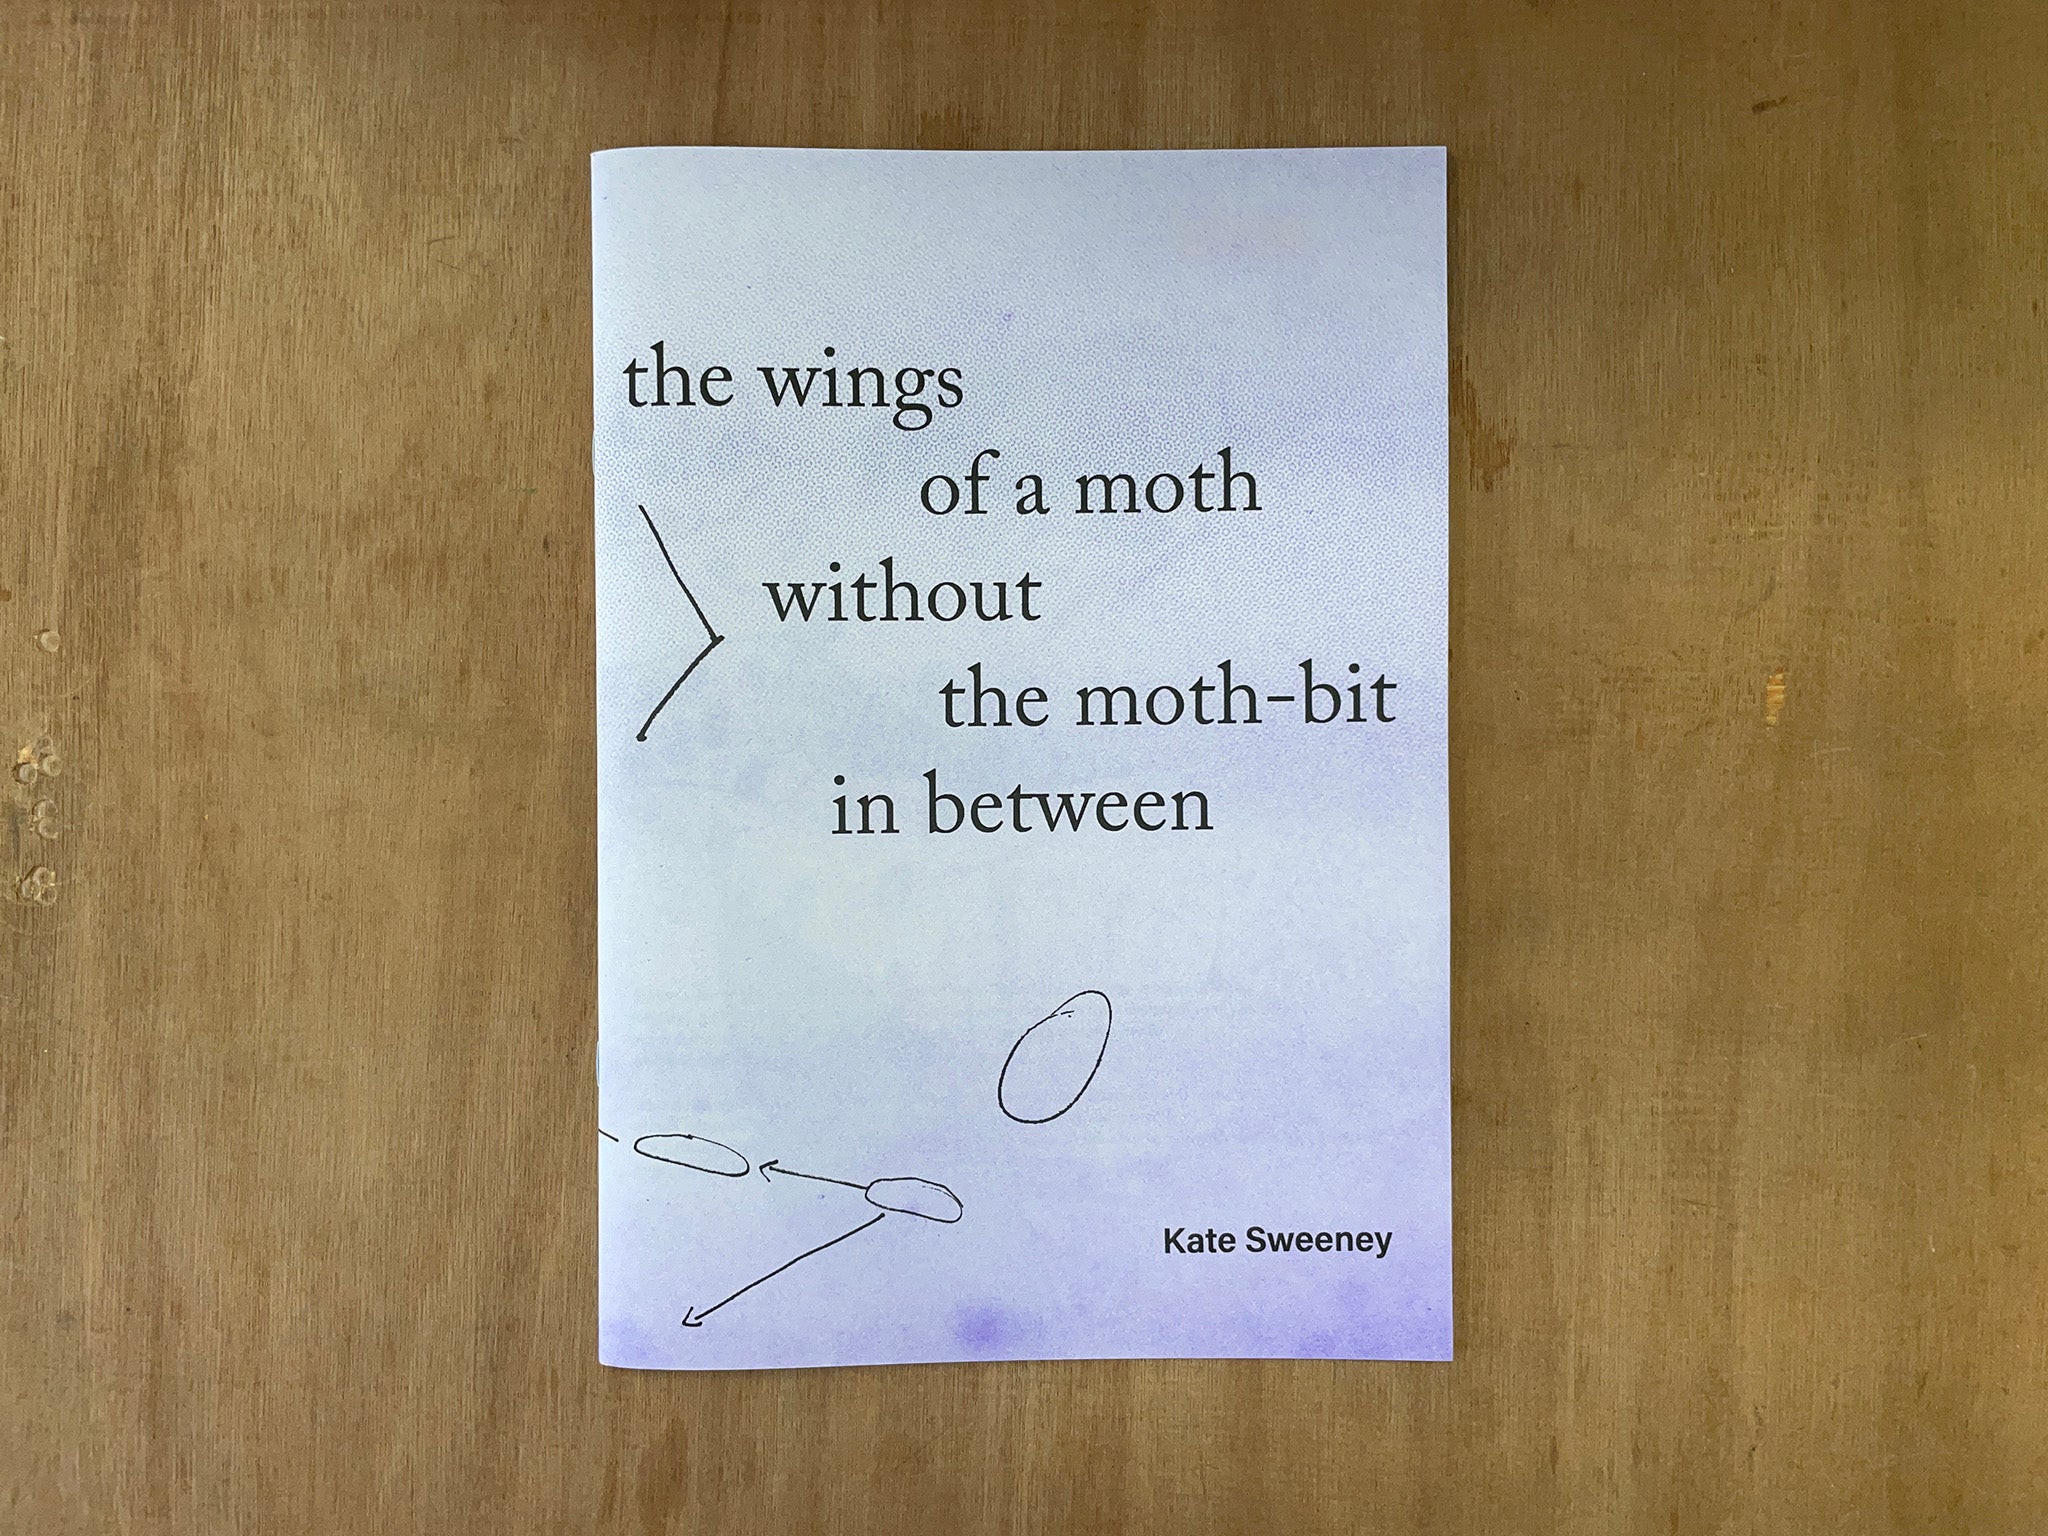 THE WINGS OF A MOTH WITHOUT THE MOTH-BIT IN BETWEEN by Kate Sweeney